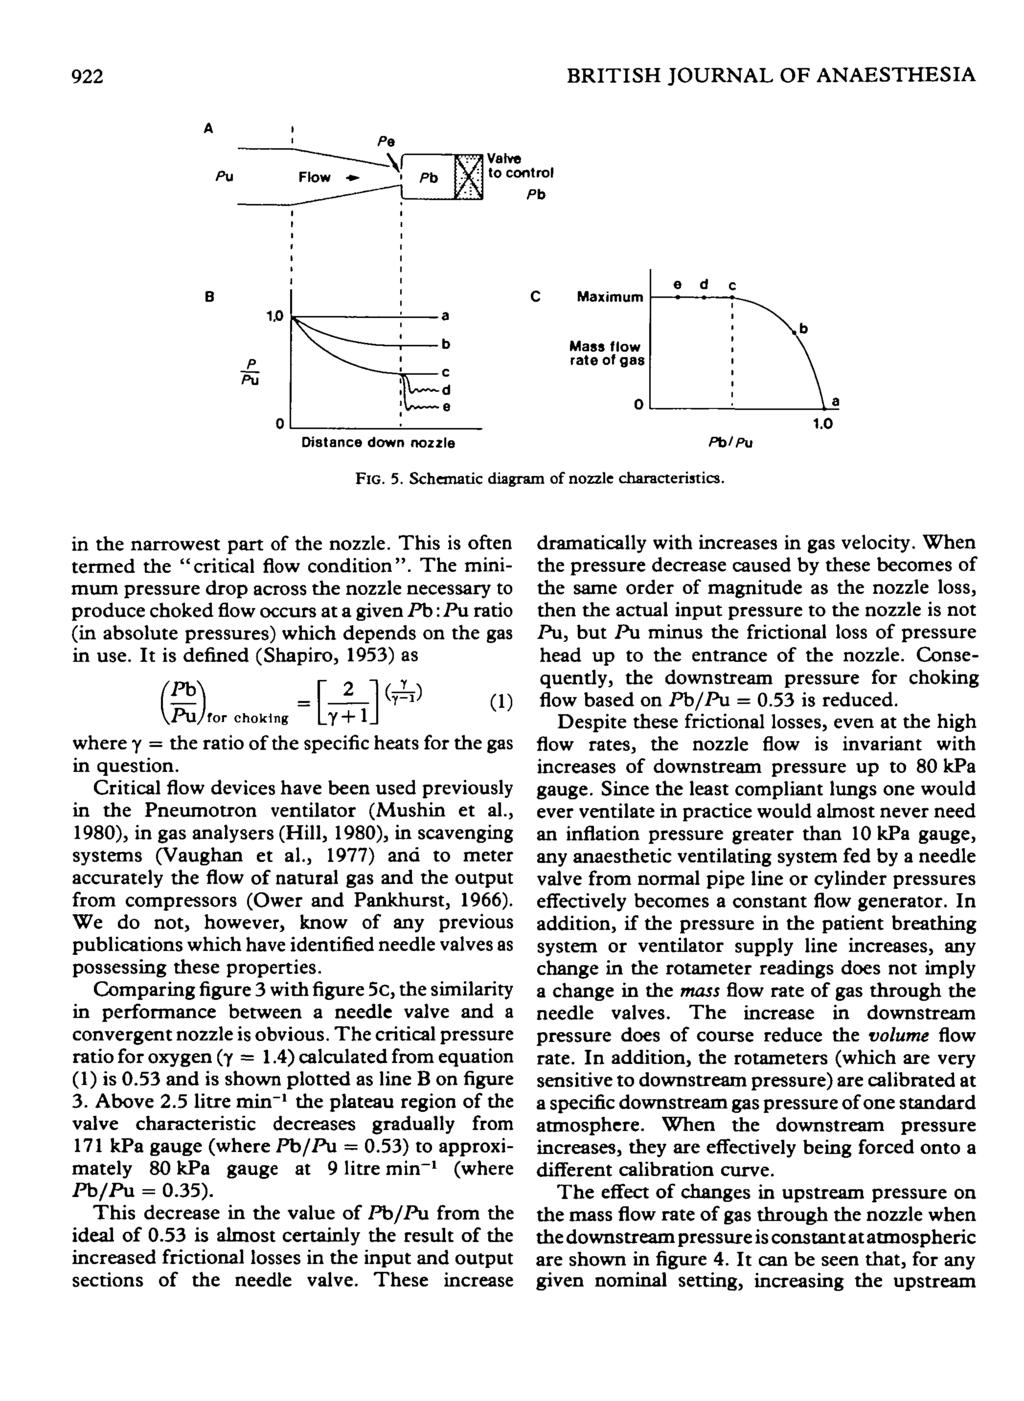 922 BRITISH JOURNAL OF ANAESTHESIA Maximum e d c Mass flow rate of gas Distance down nozzle Pb/Pu FIG. 5. Schematic diagram of nozzle characteristics. in the narrowest part of the nozzle.